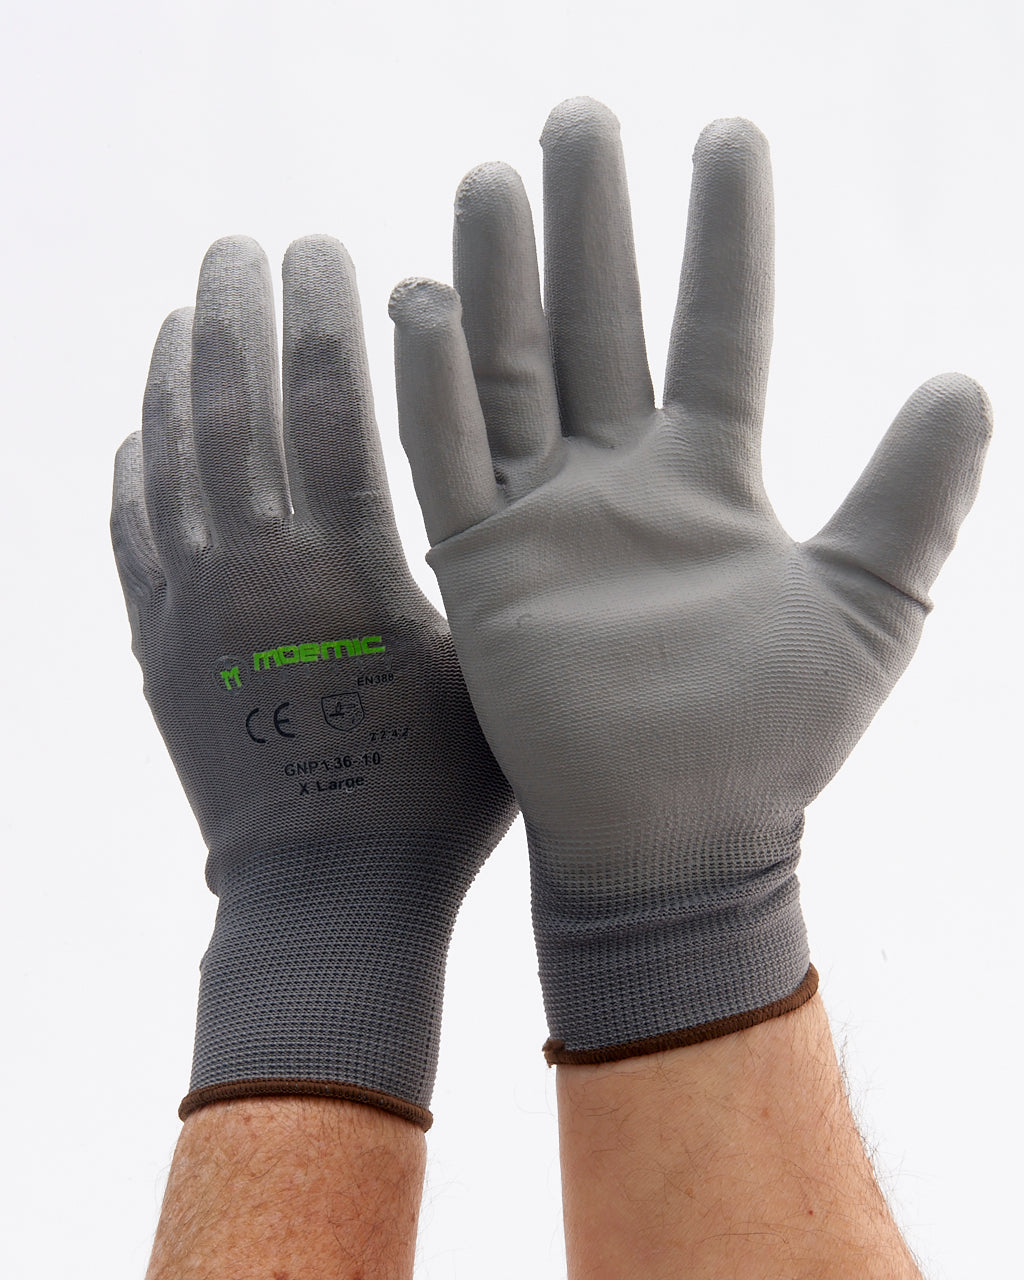 Moemic Liteflex PU Coated Nylon Glove 6pk - Gloves - Best Buy Trade Supplies Direct to Trade